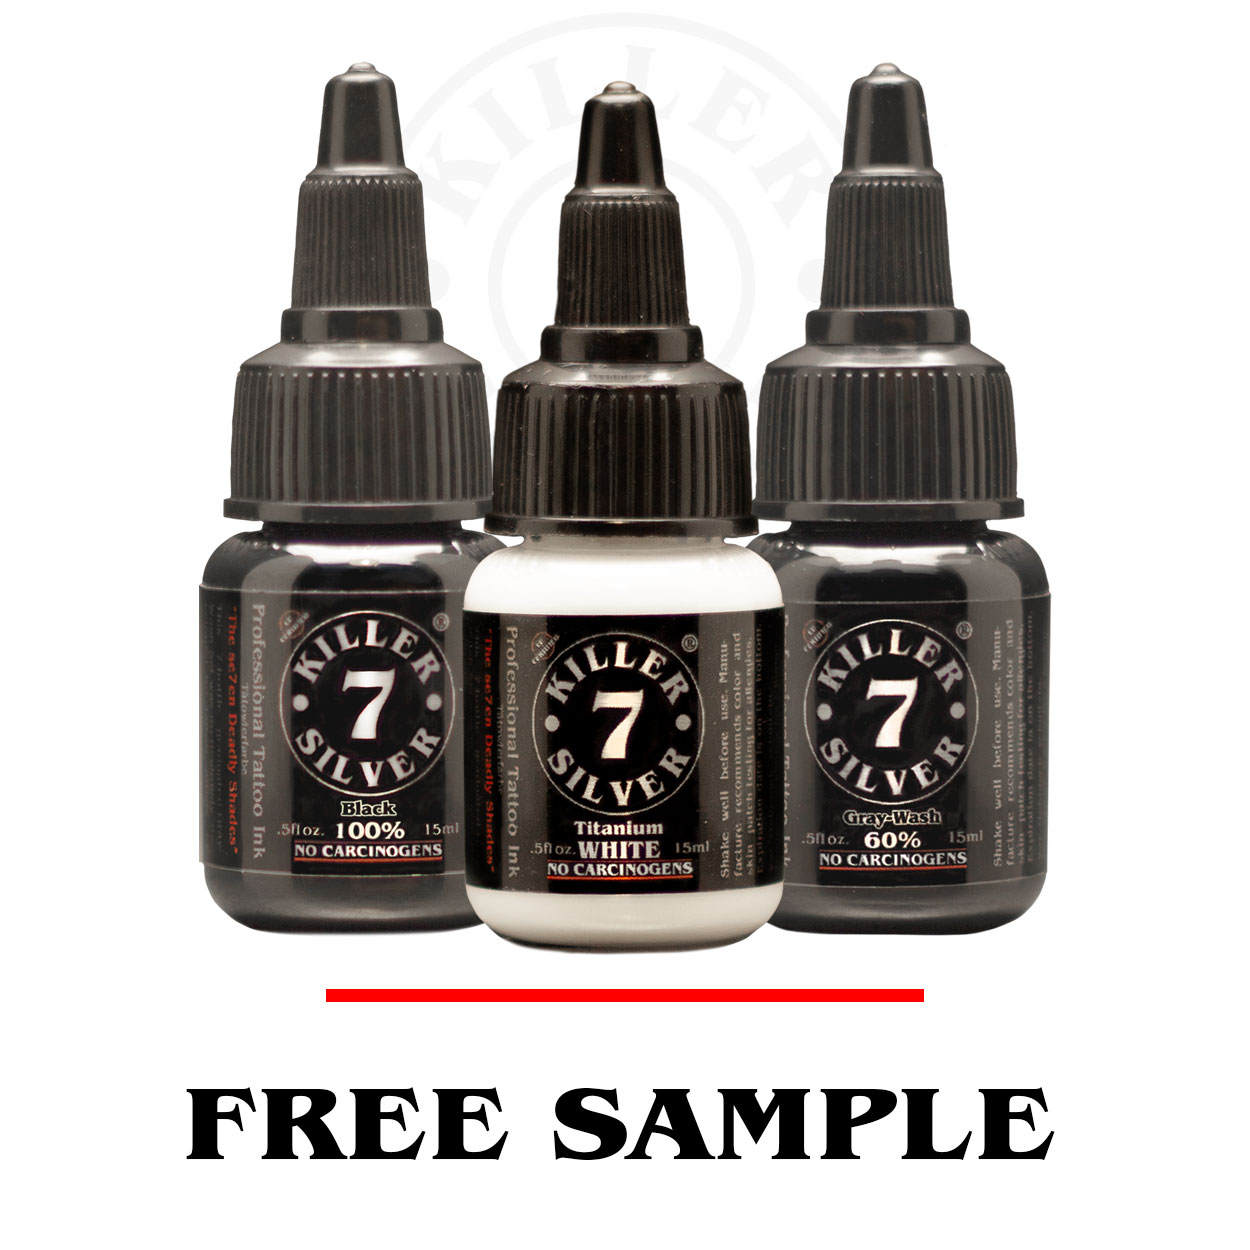 FREE SAMPLE • Pick your favorite shade from our selection • Killer Silver